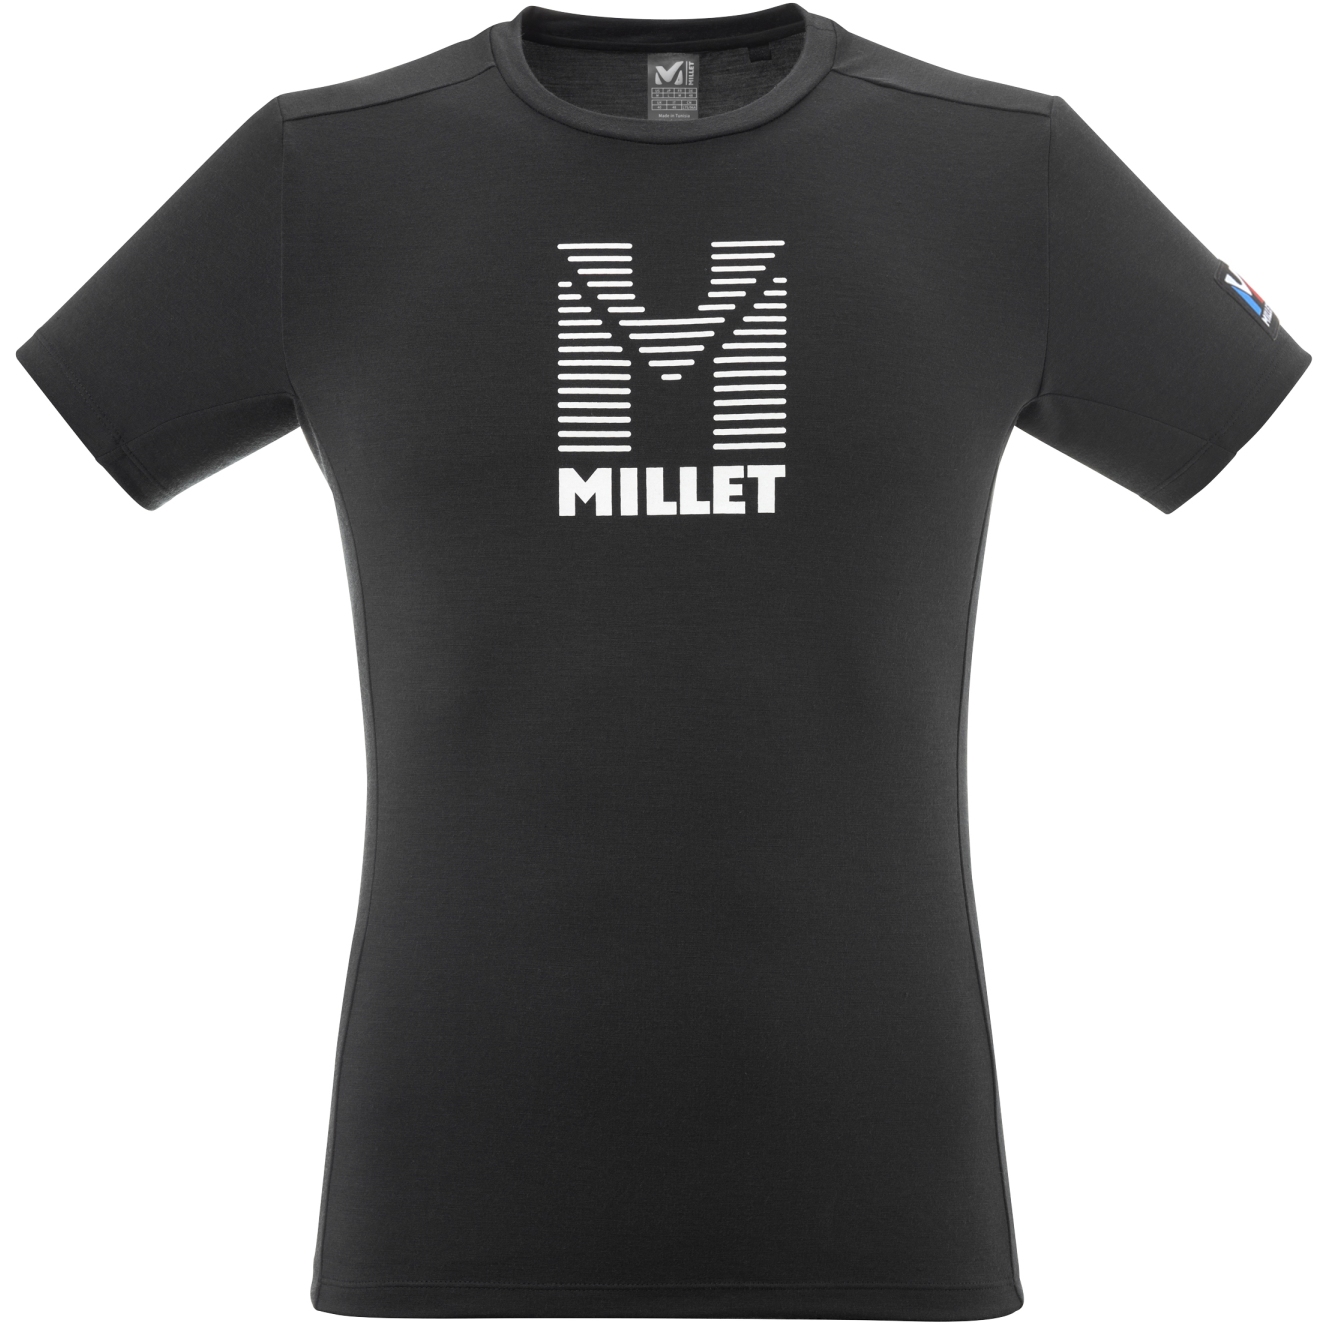 Millet Outdoor Clothing Top Prices BIKE24